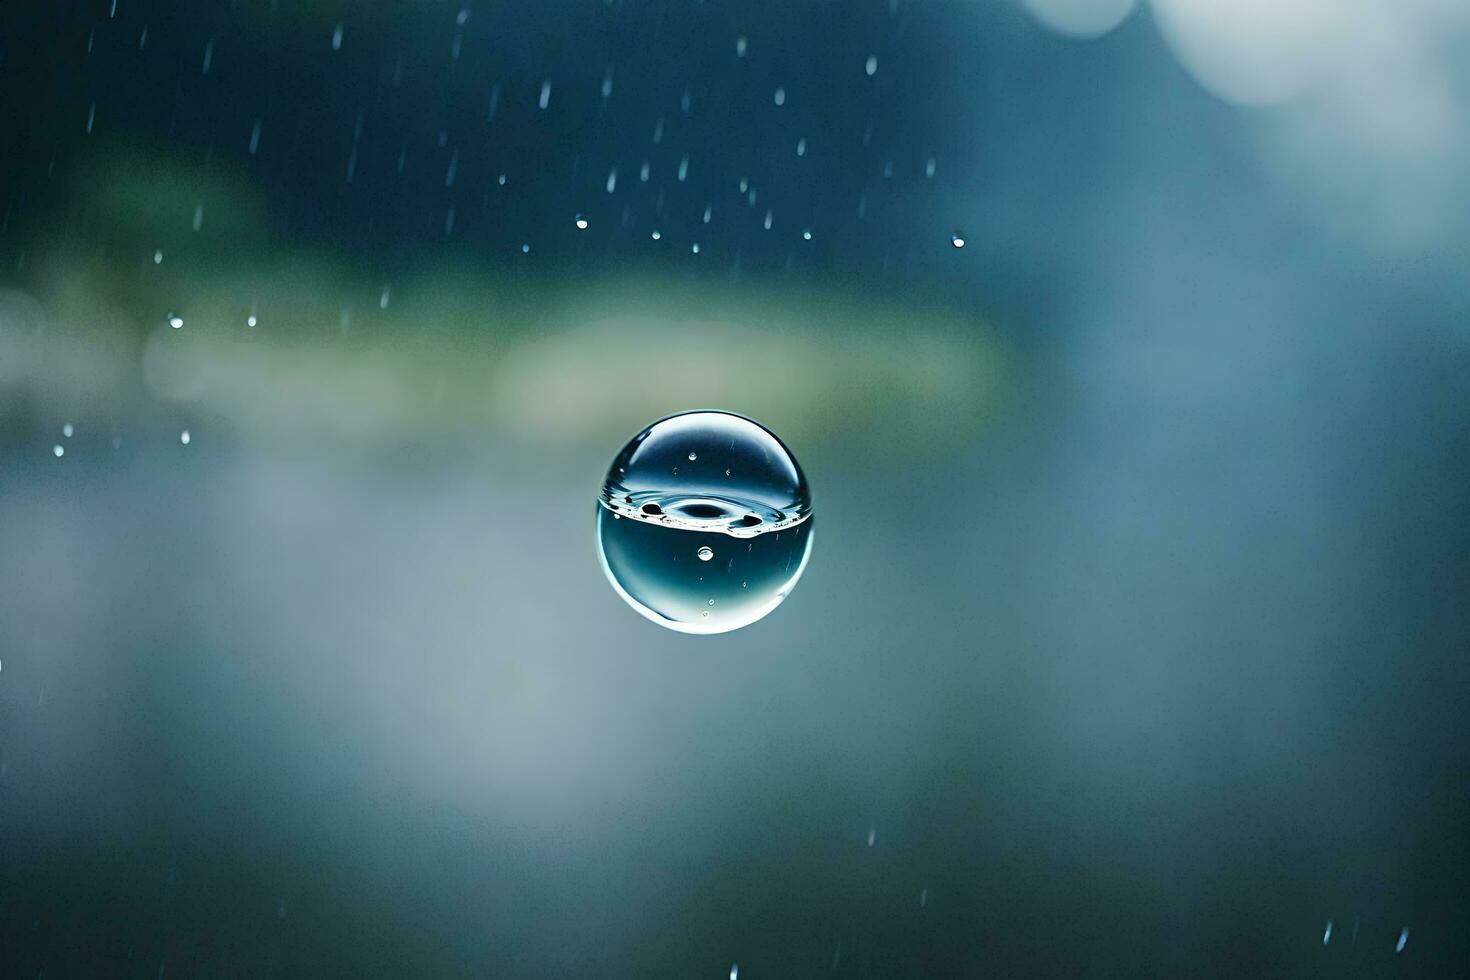 AI generated a drop of water is shown in the rain photo